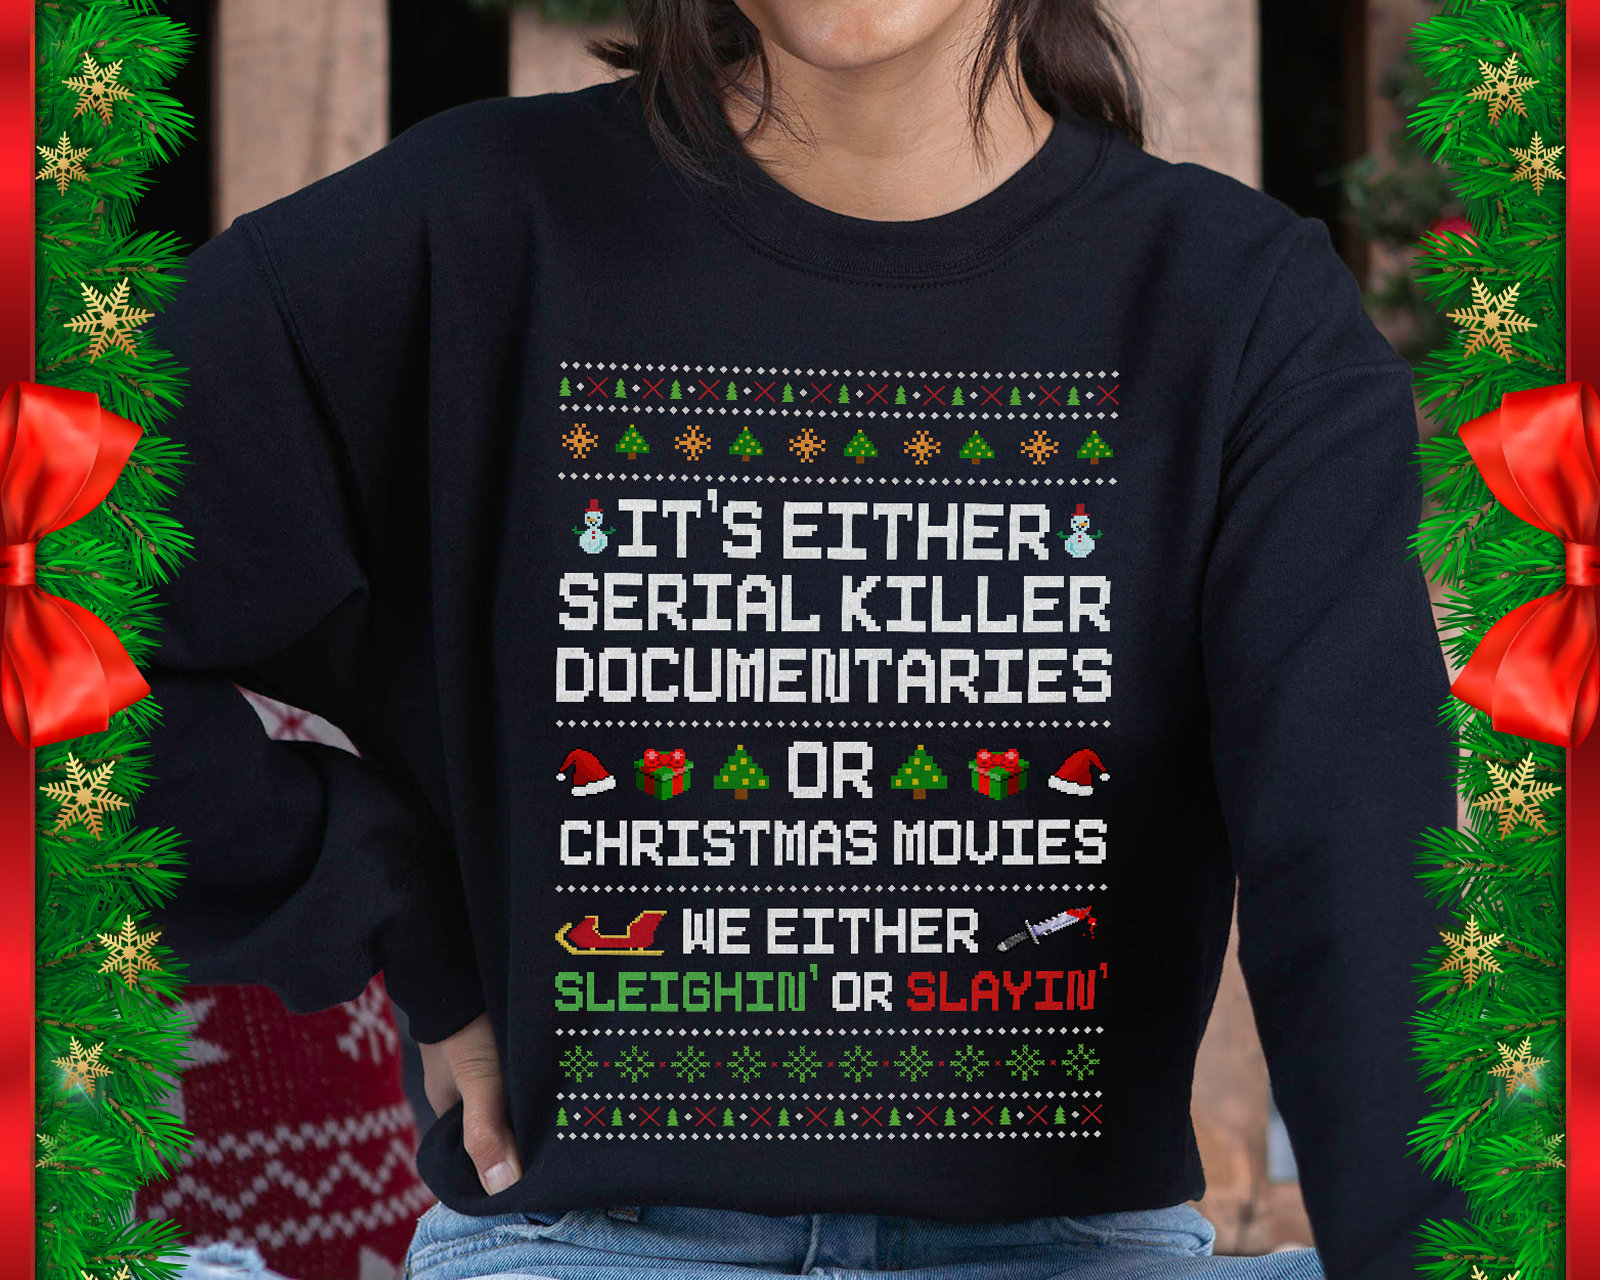  Ugly Christmas Sweater for Men's and Women's Funny Classic  Designs : Clothing, Shoes & Jewelry